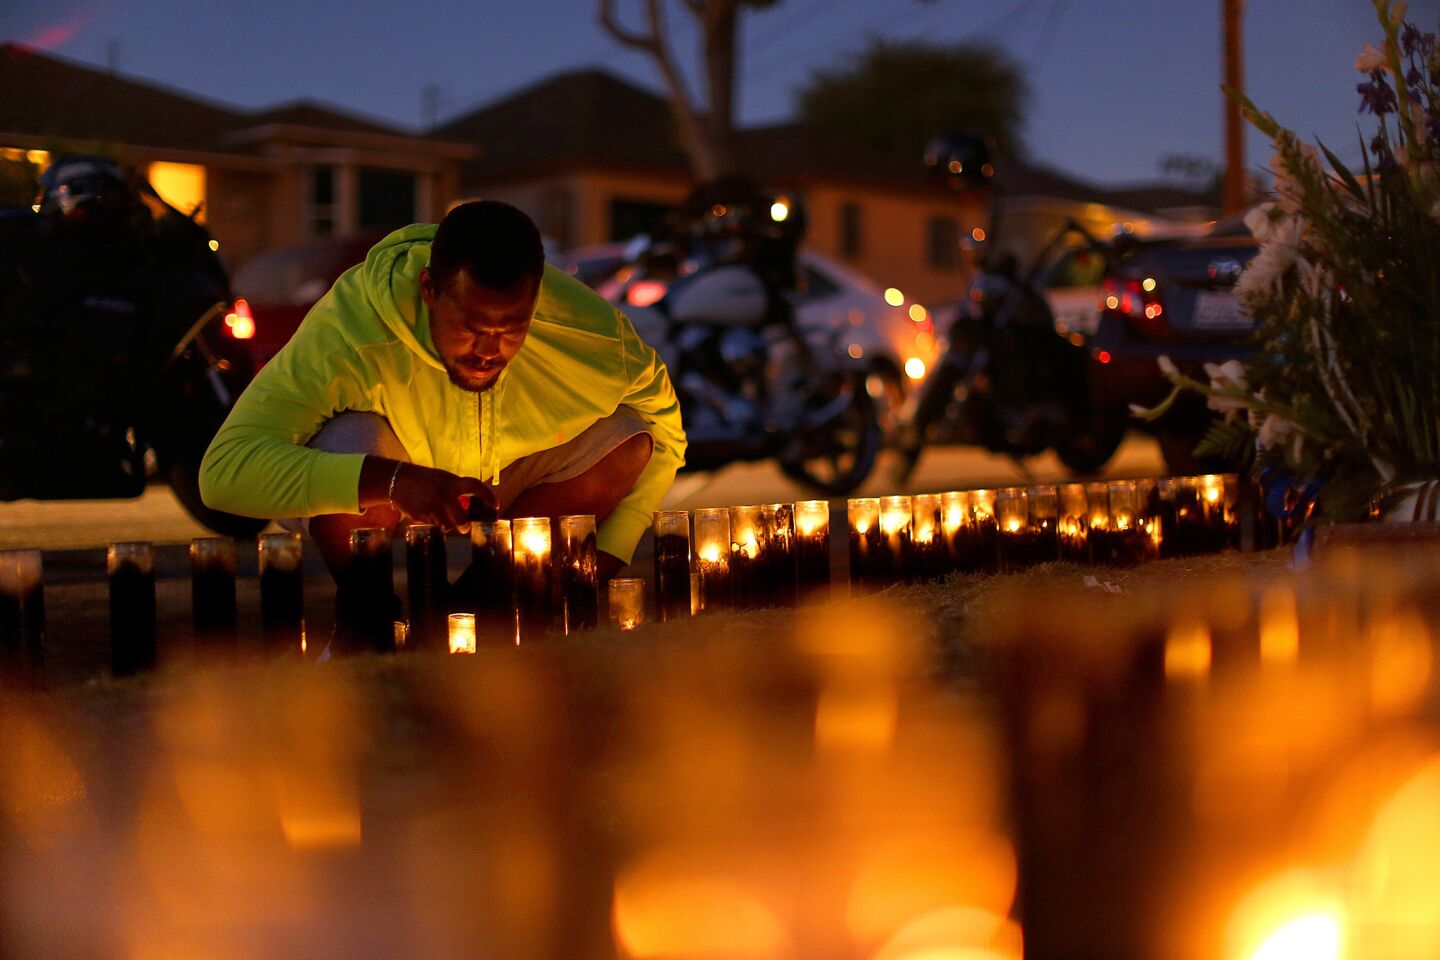 Carl Winzer lights candles at the scene where 18-year-old Carnell Snell Jr. was fatally shot by Los Angeles police officers.